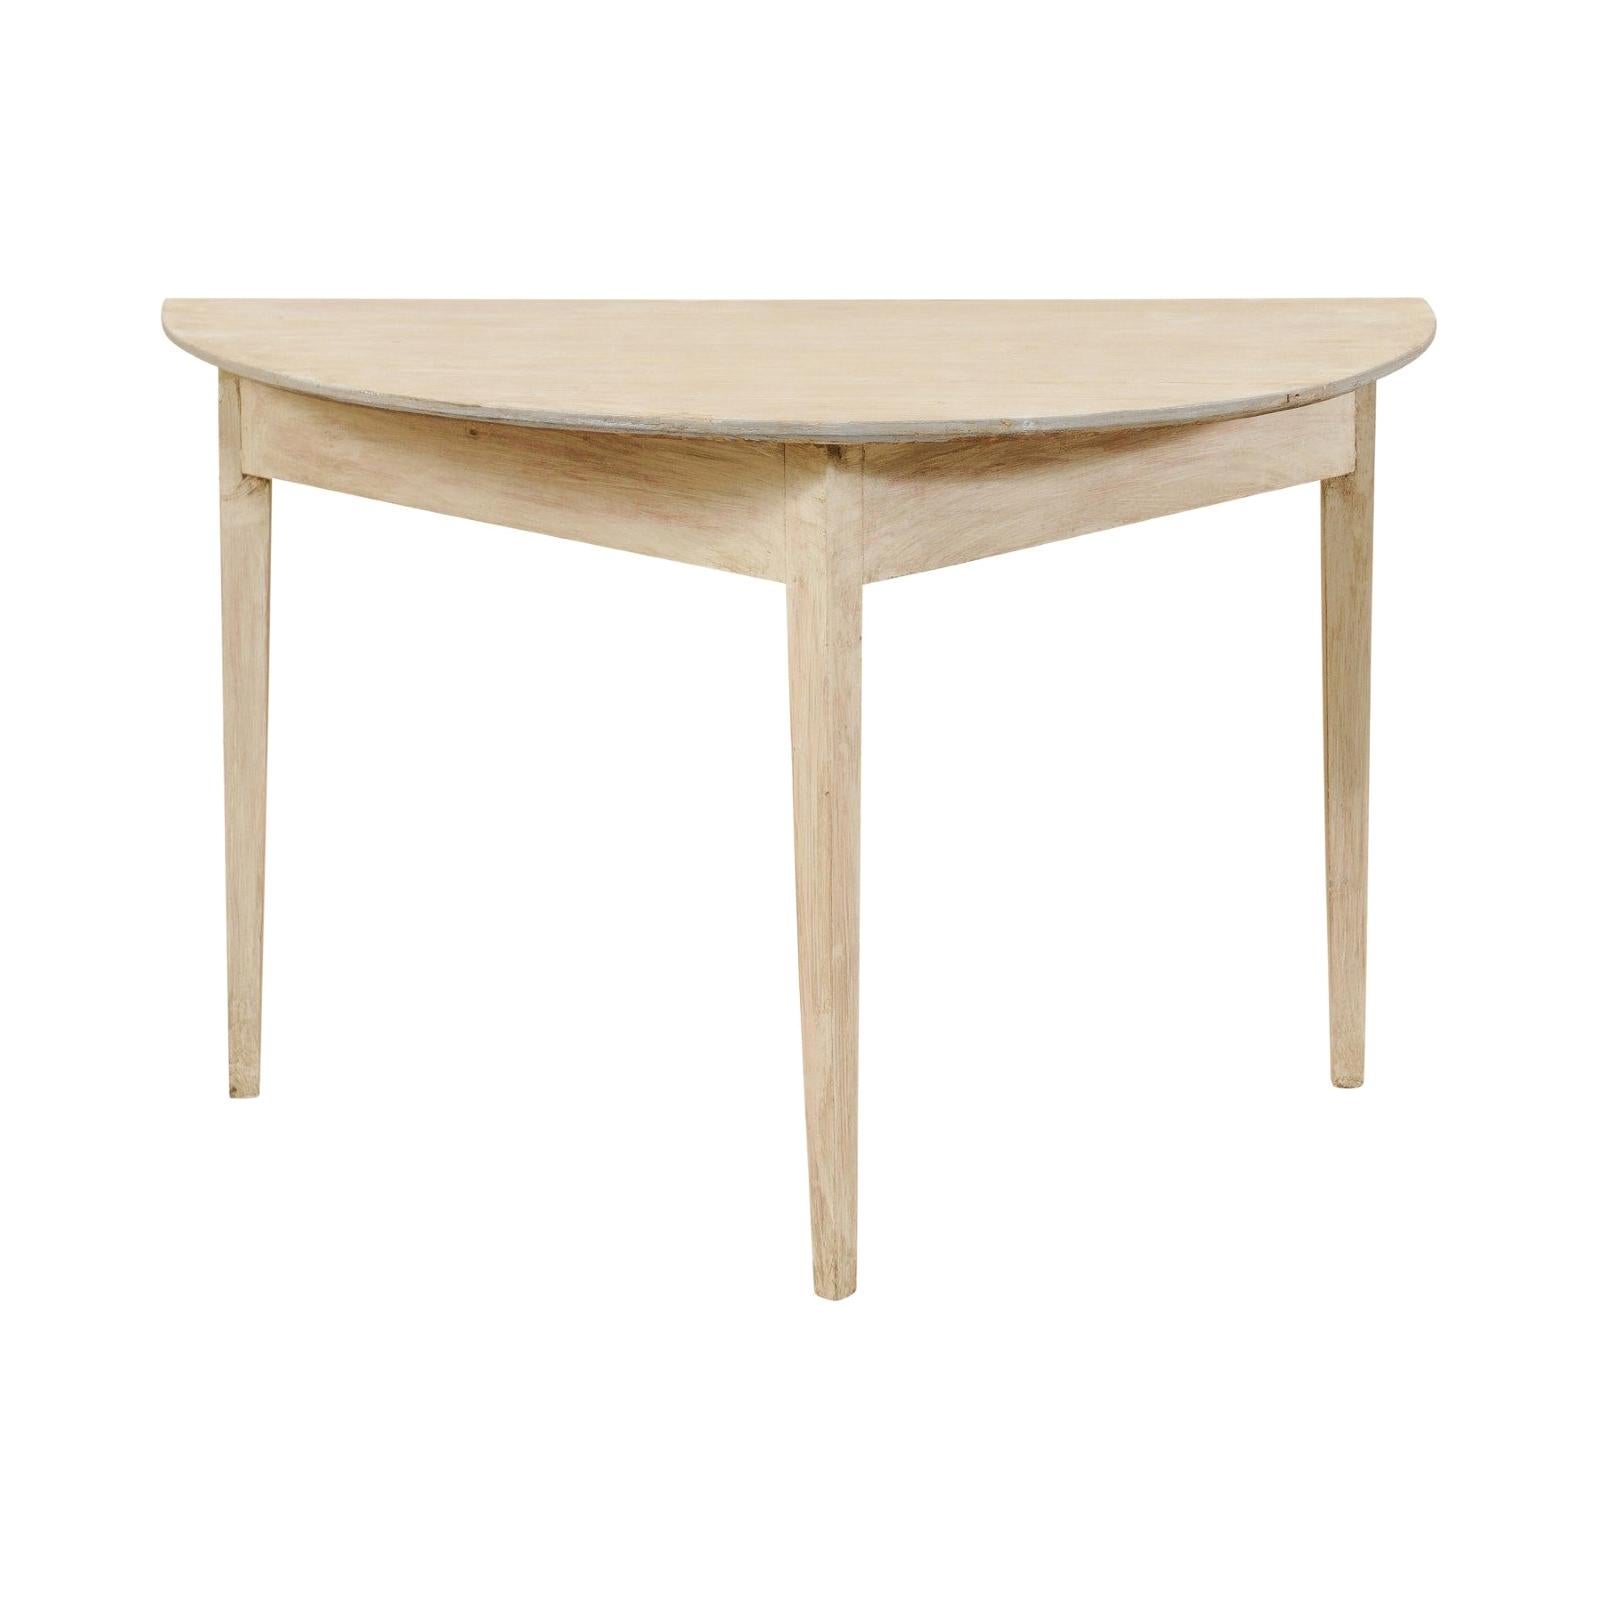 Single Swedish Demilune Table from 19th Century